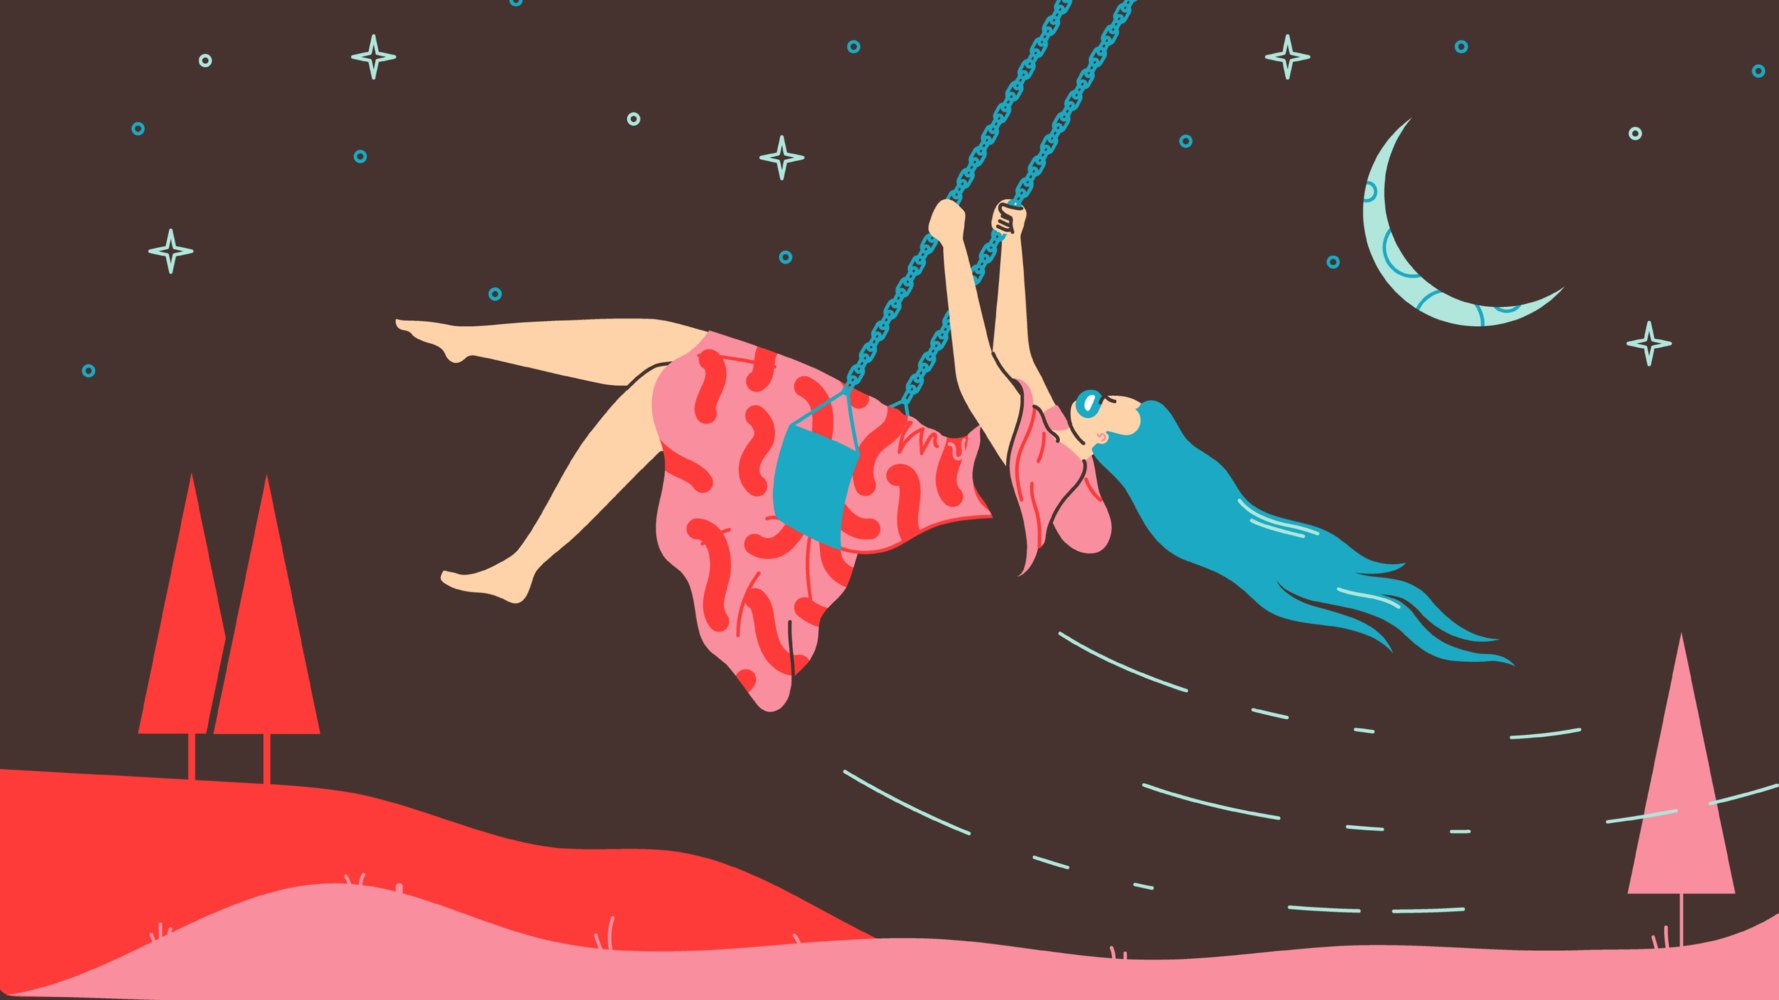 Woman playing on a swing under a night sky